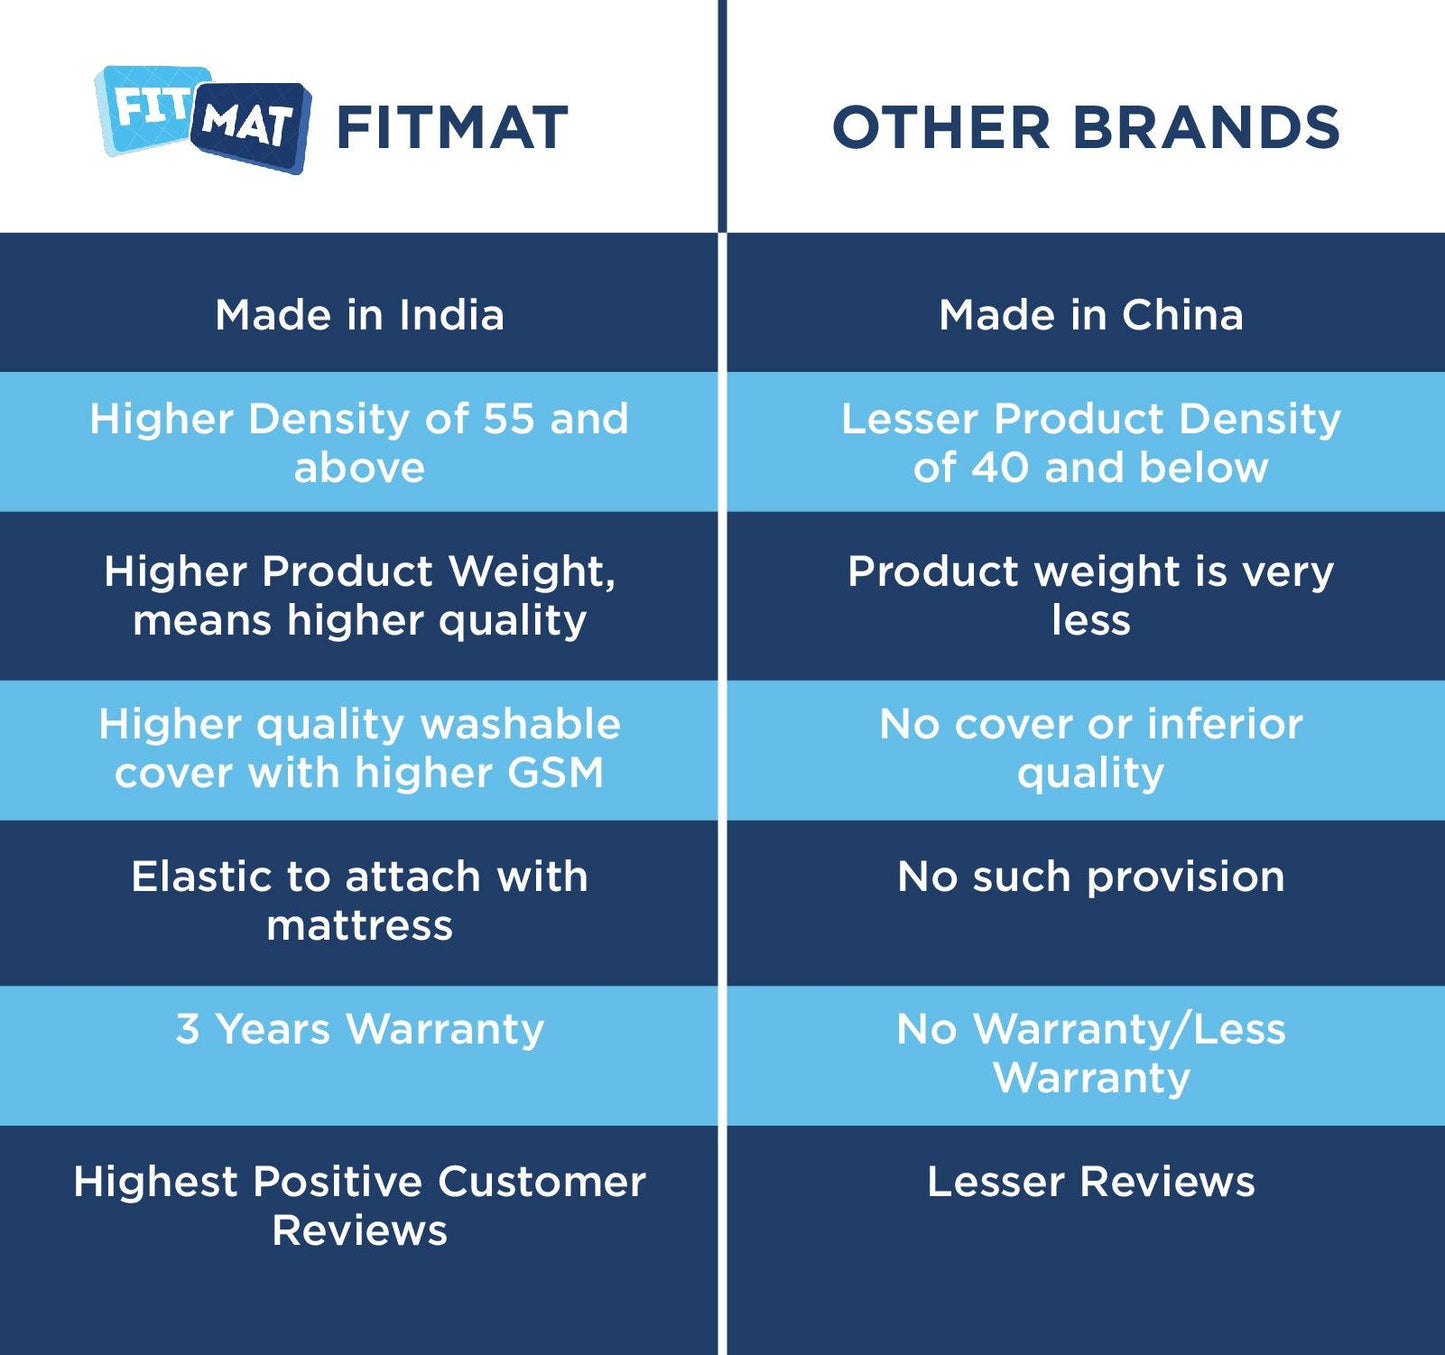 fitmat mattress and other brands